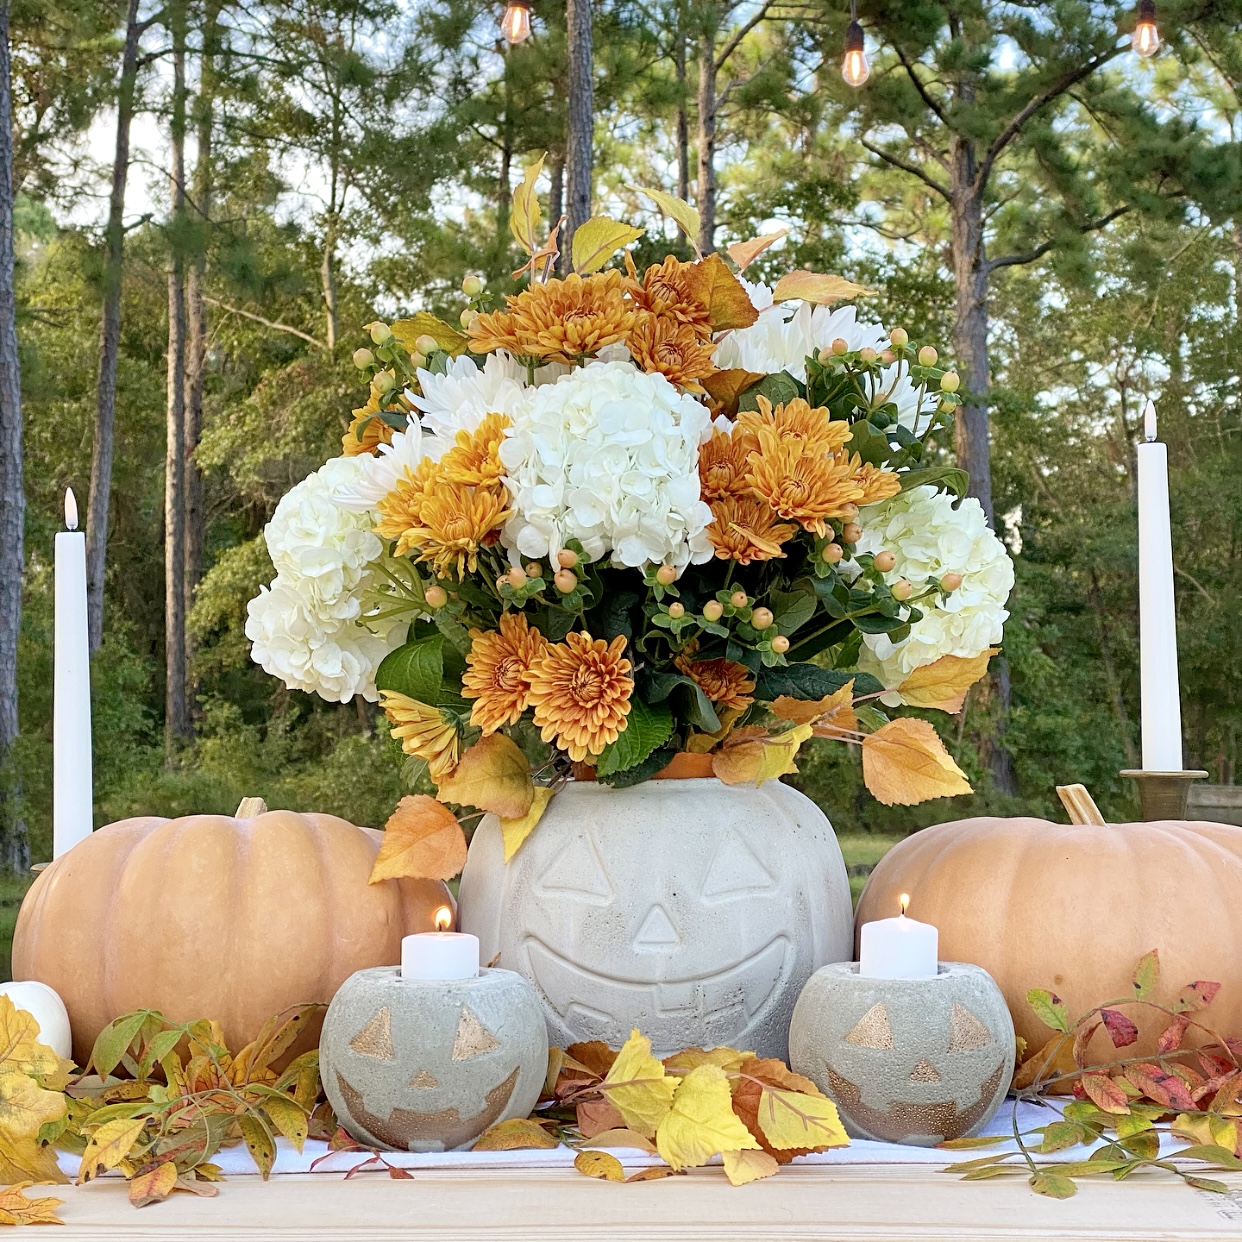 DIY concrete jack o'lanterns used in a centerpiece on the table as candle holders and a vessel for a fall floral arrangement.